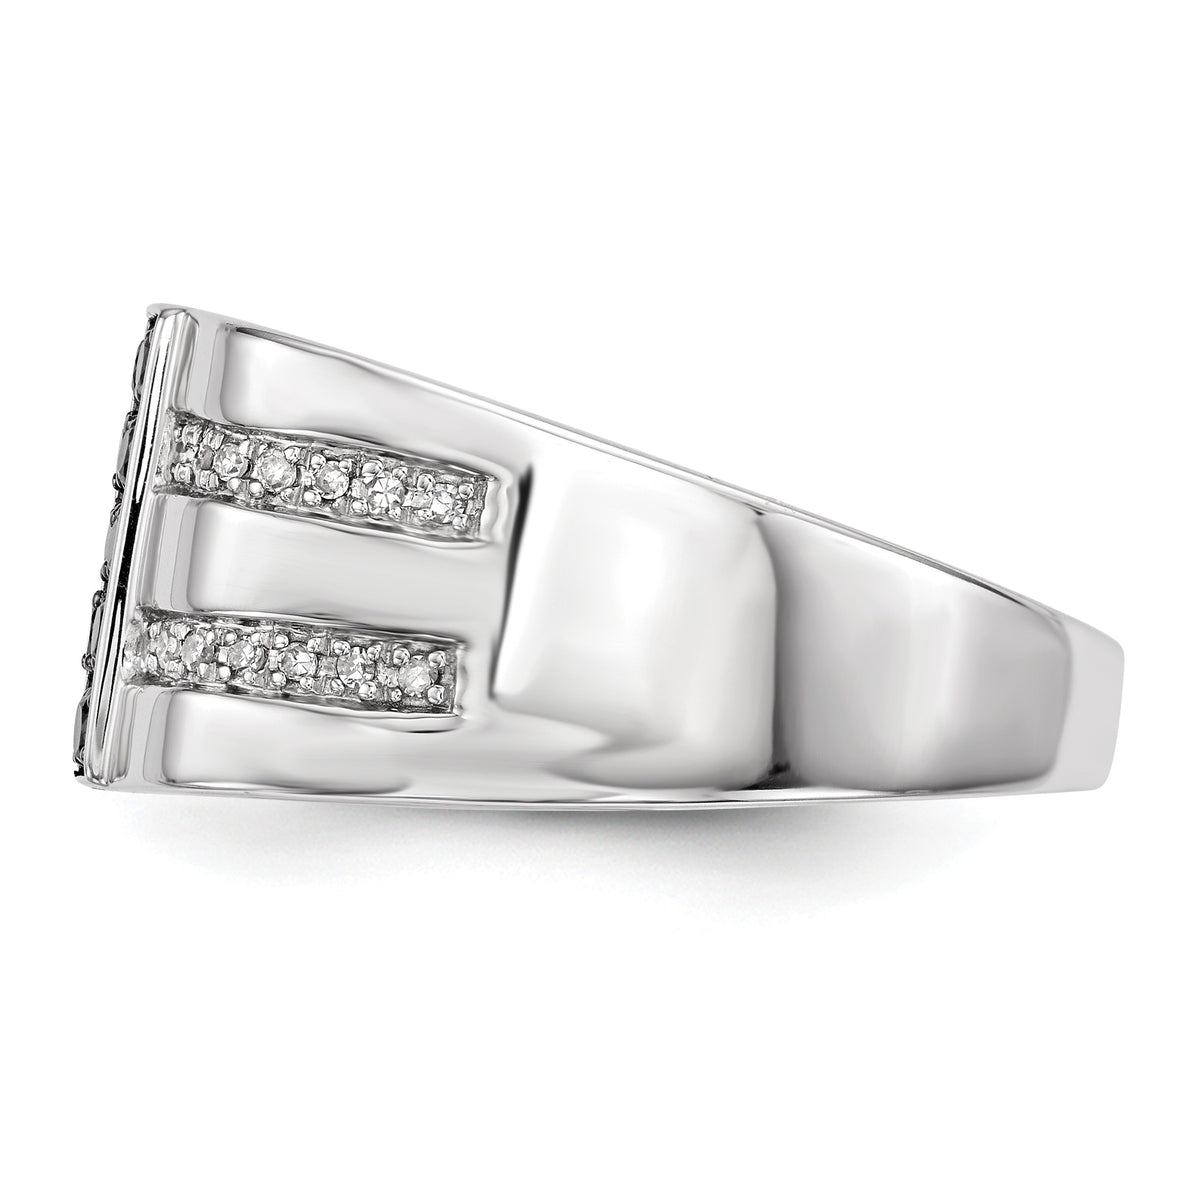 Alternate view of the Mens Sterling Silver 1/2 Ctw White &amp; Black Diamond Flat Top 11mm Band by The Black Bow Jewelry Co.